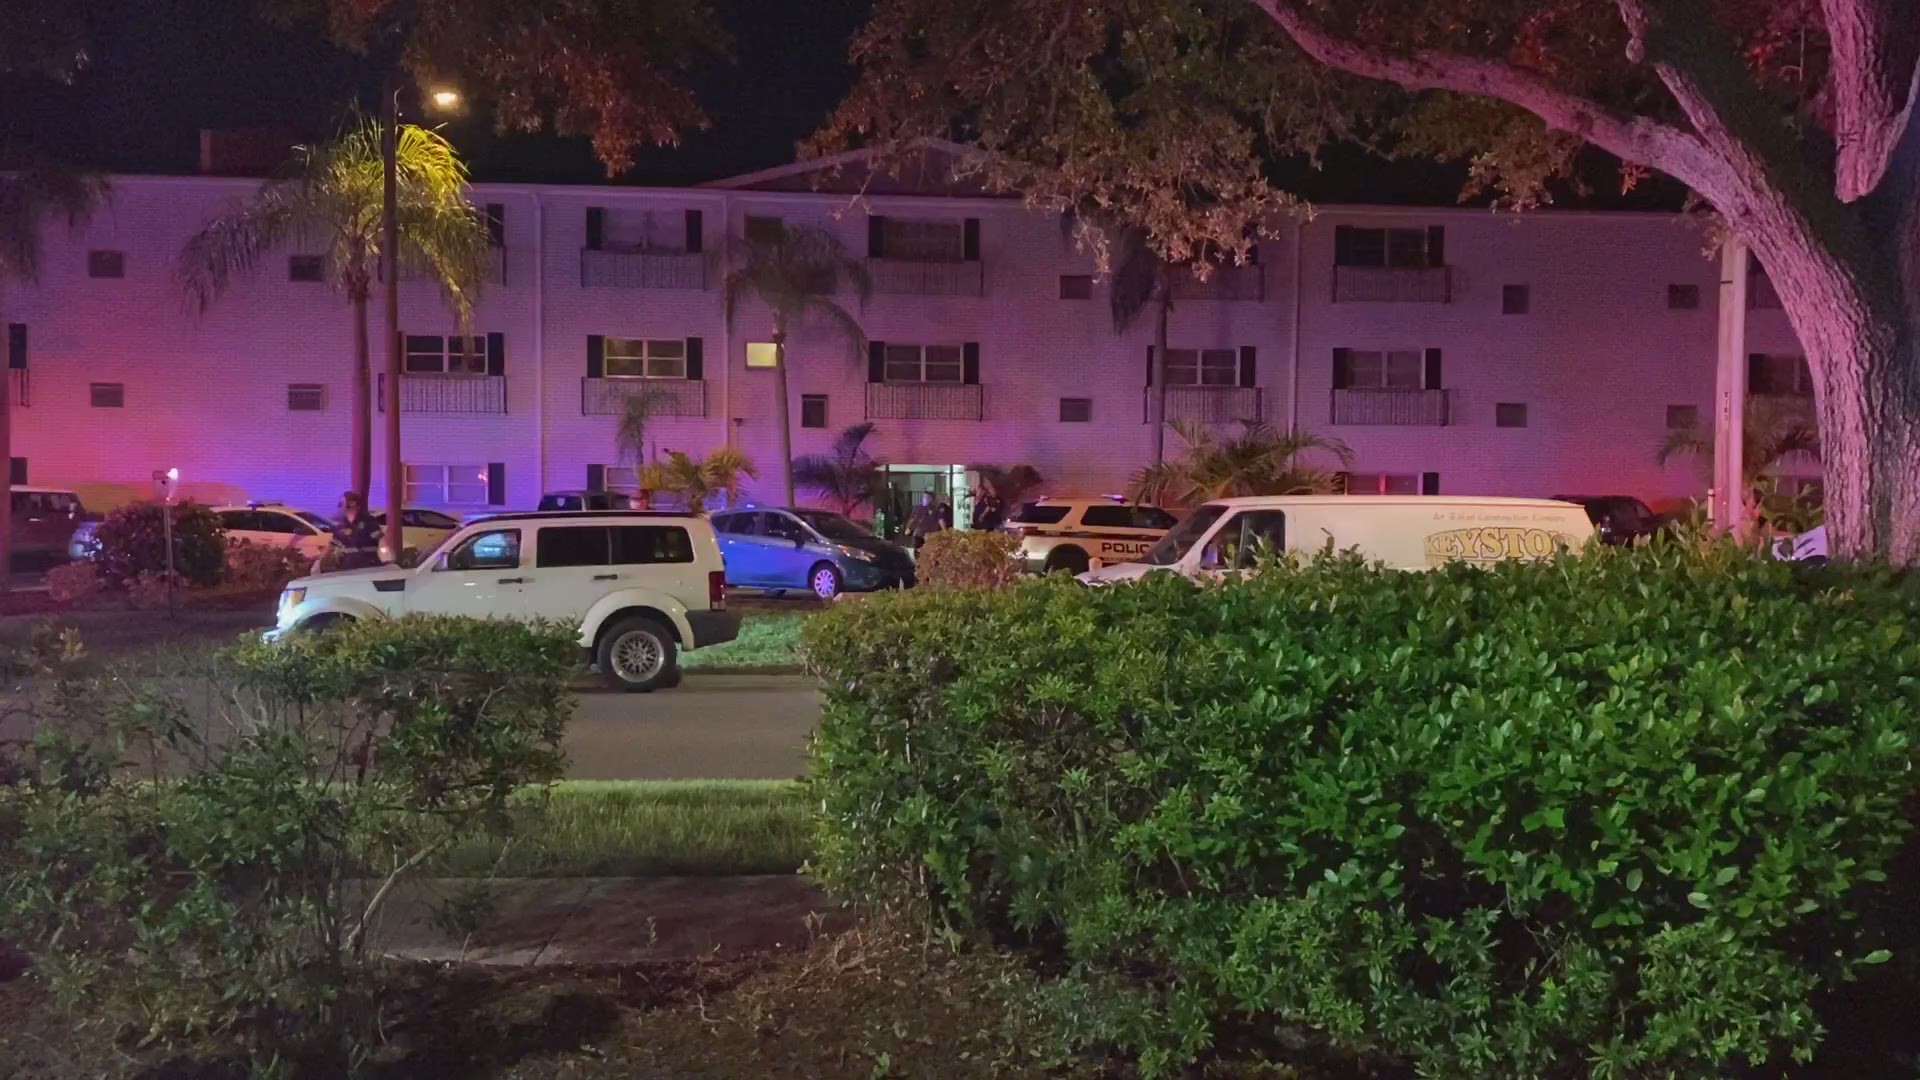 St. Petersburg Police confirmed to 10 Tampa Bay that there has been an officer-involved shooting Friday night.